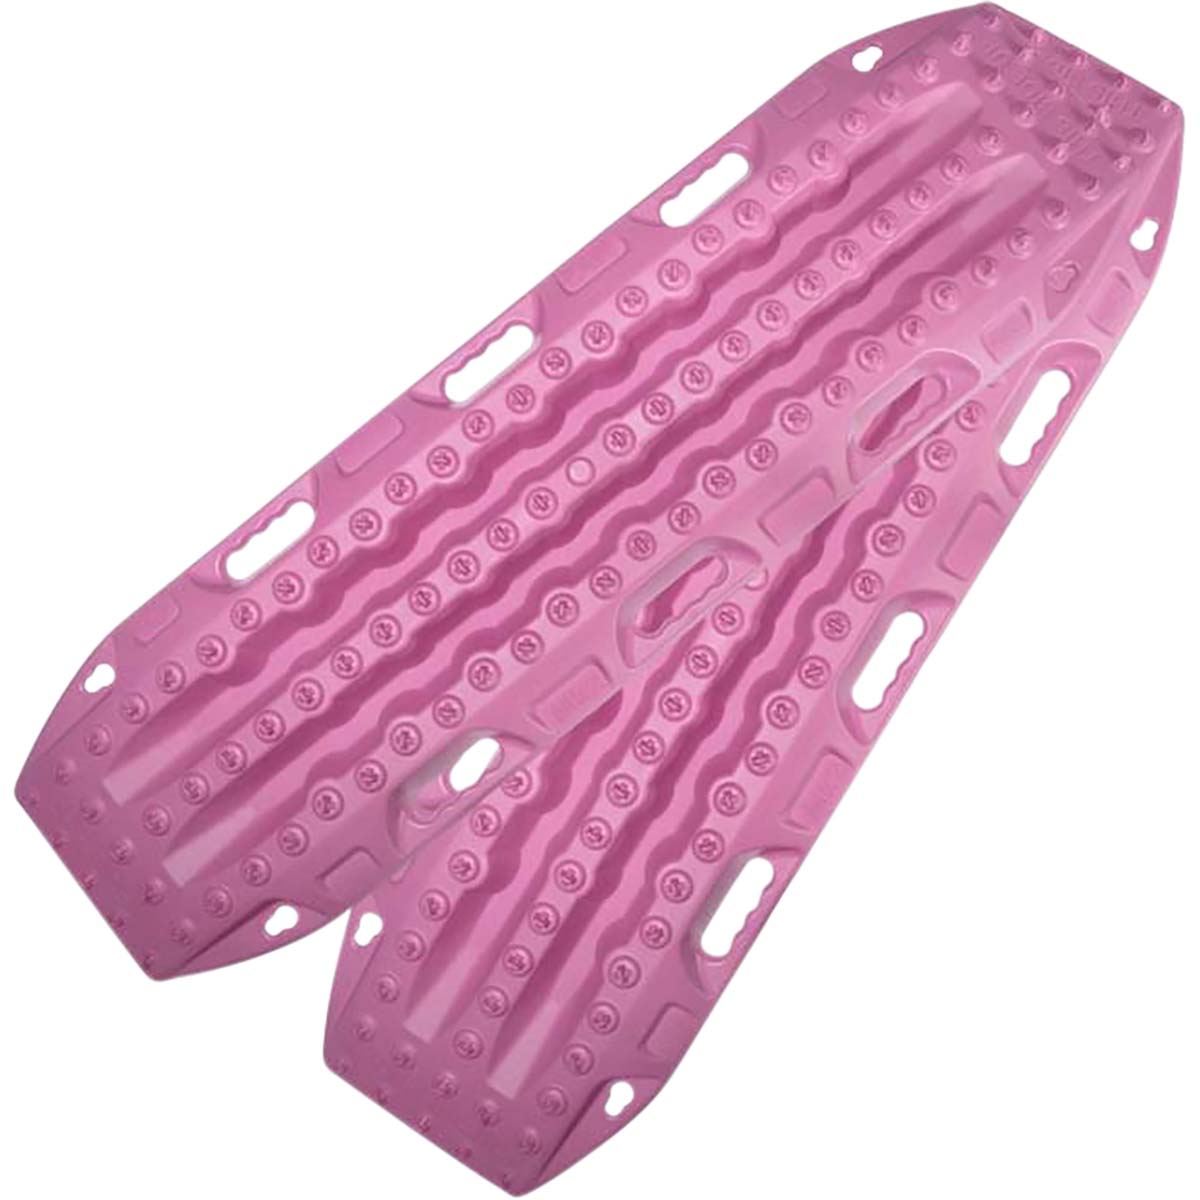 Maxtrax MKII Recovery Boards Pink